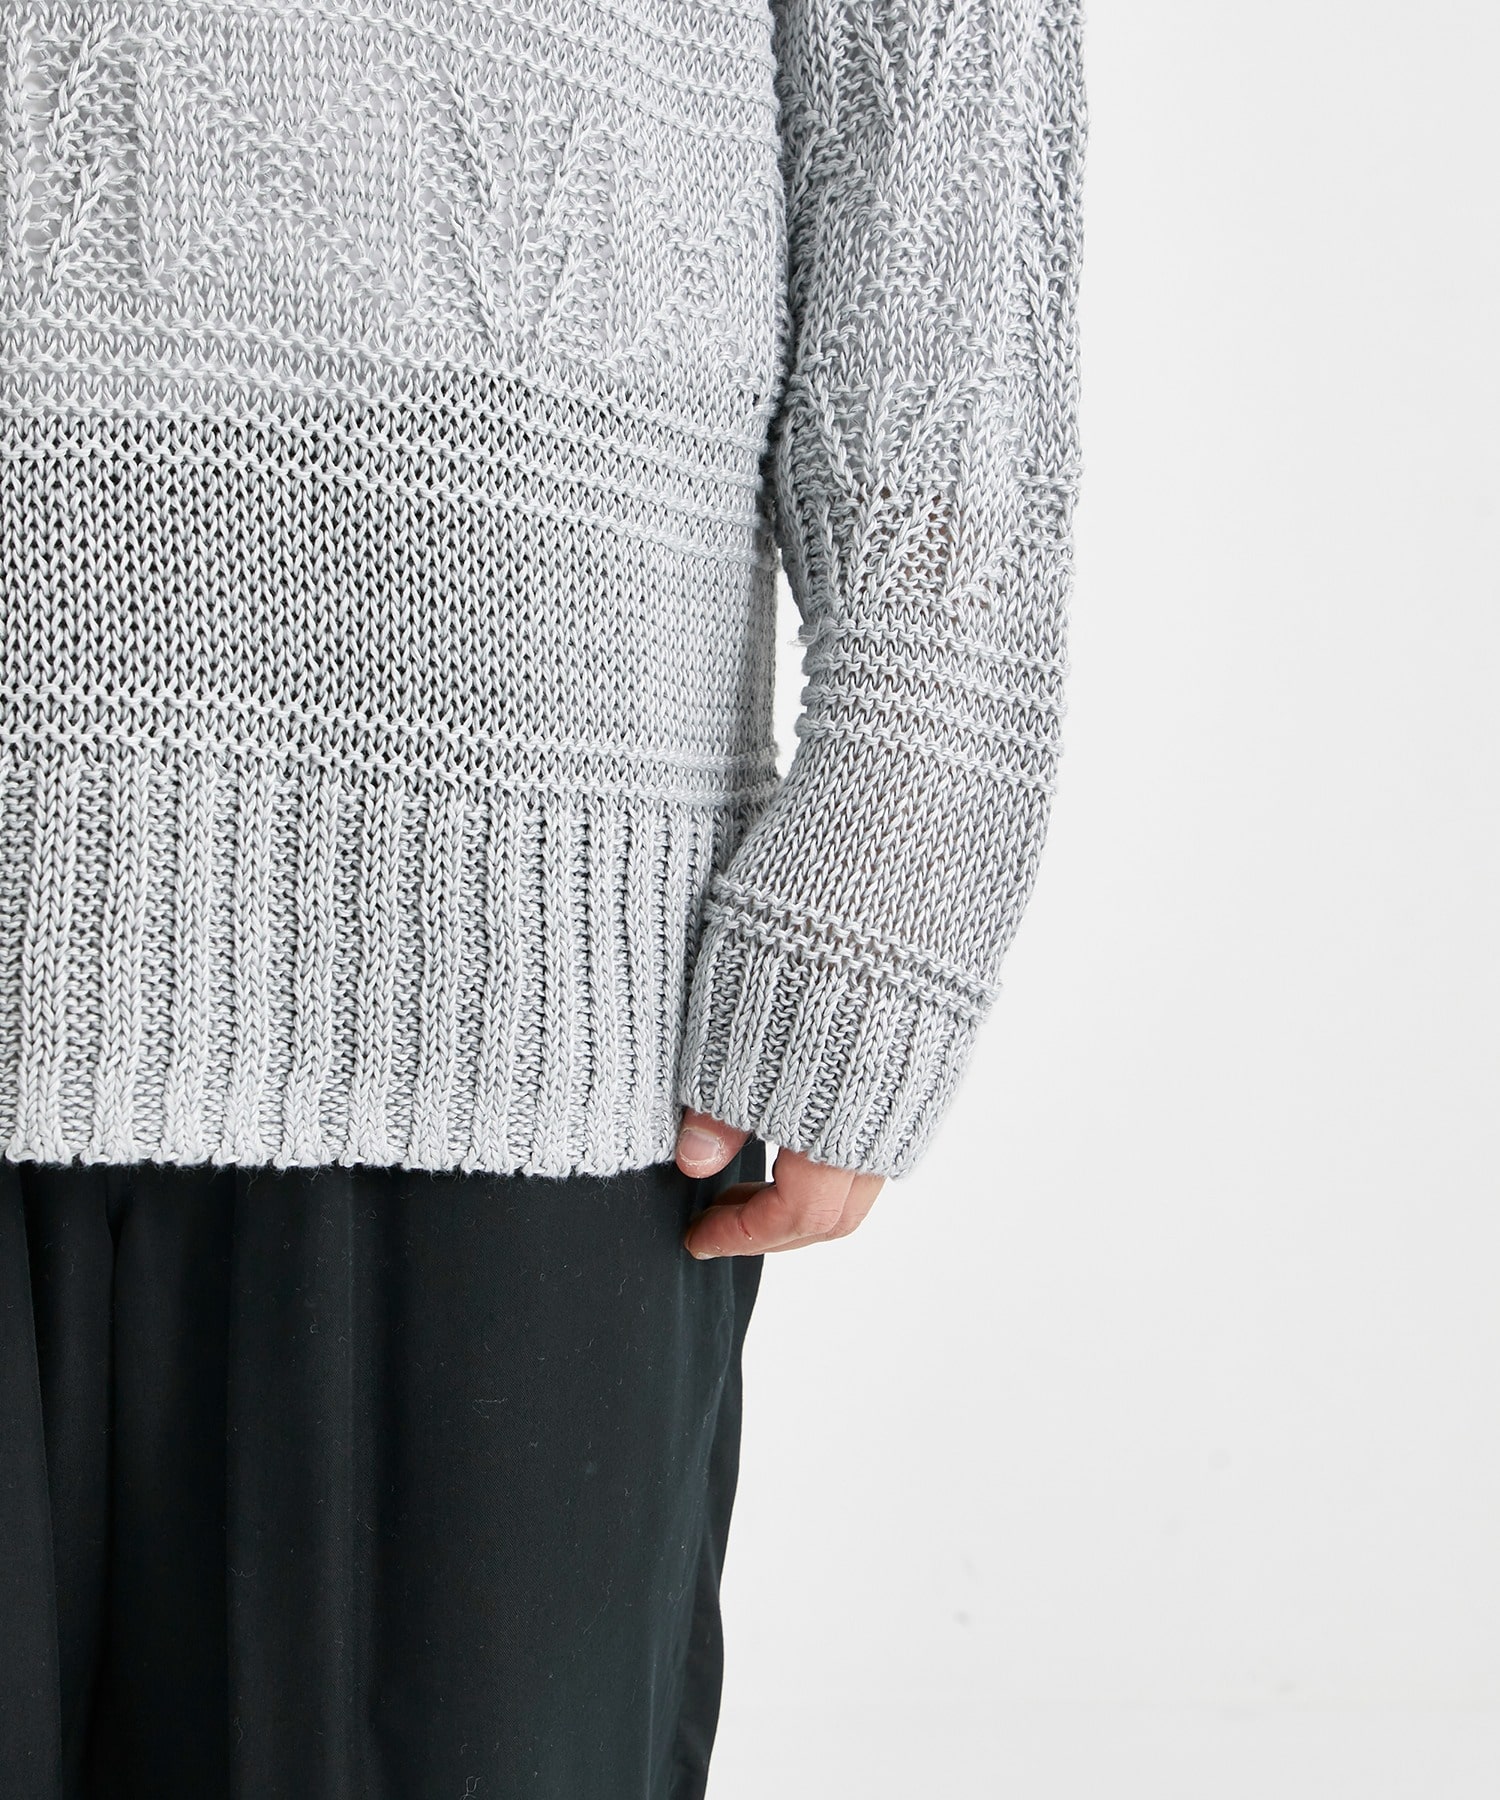 Linen fisherman Knit(1 GREY): th products: MEN｜THE TOKYO ONLINE STORE